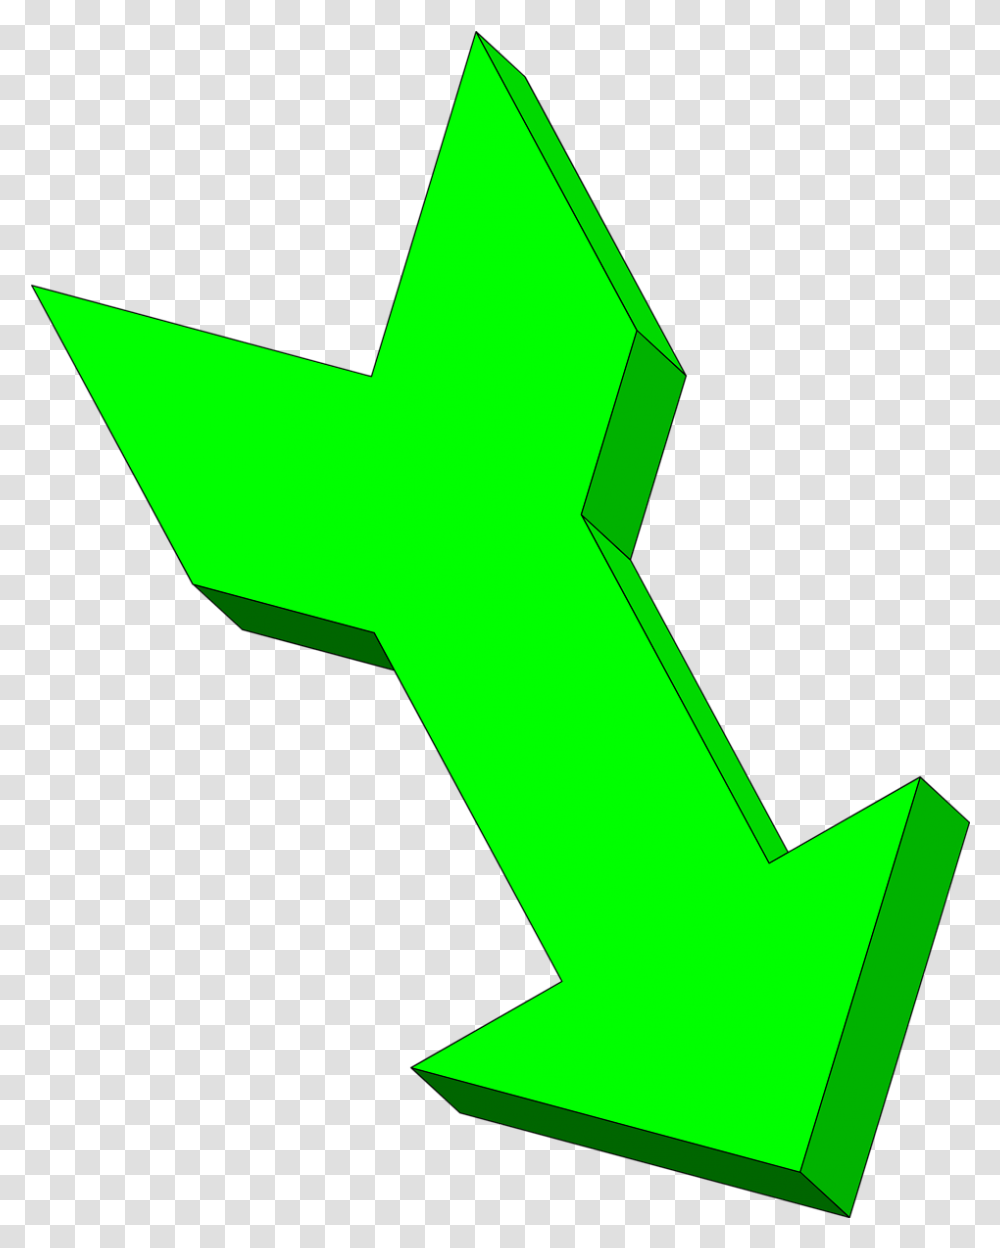 3d Curved Arrow Clip Art Green Arrow Pointing Down Free Pictures Arrow Green, Symbol, Star Symbol Transparent Png